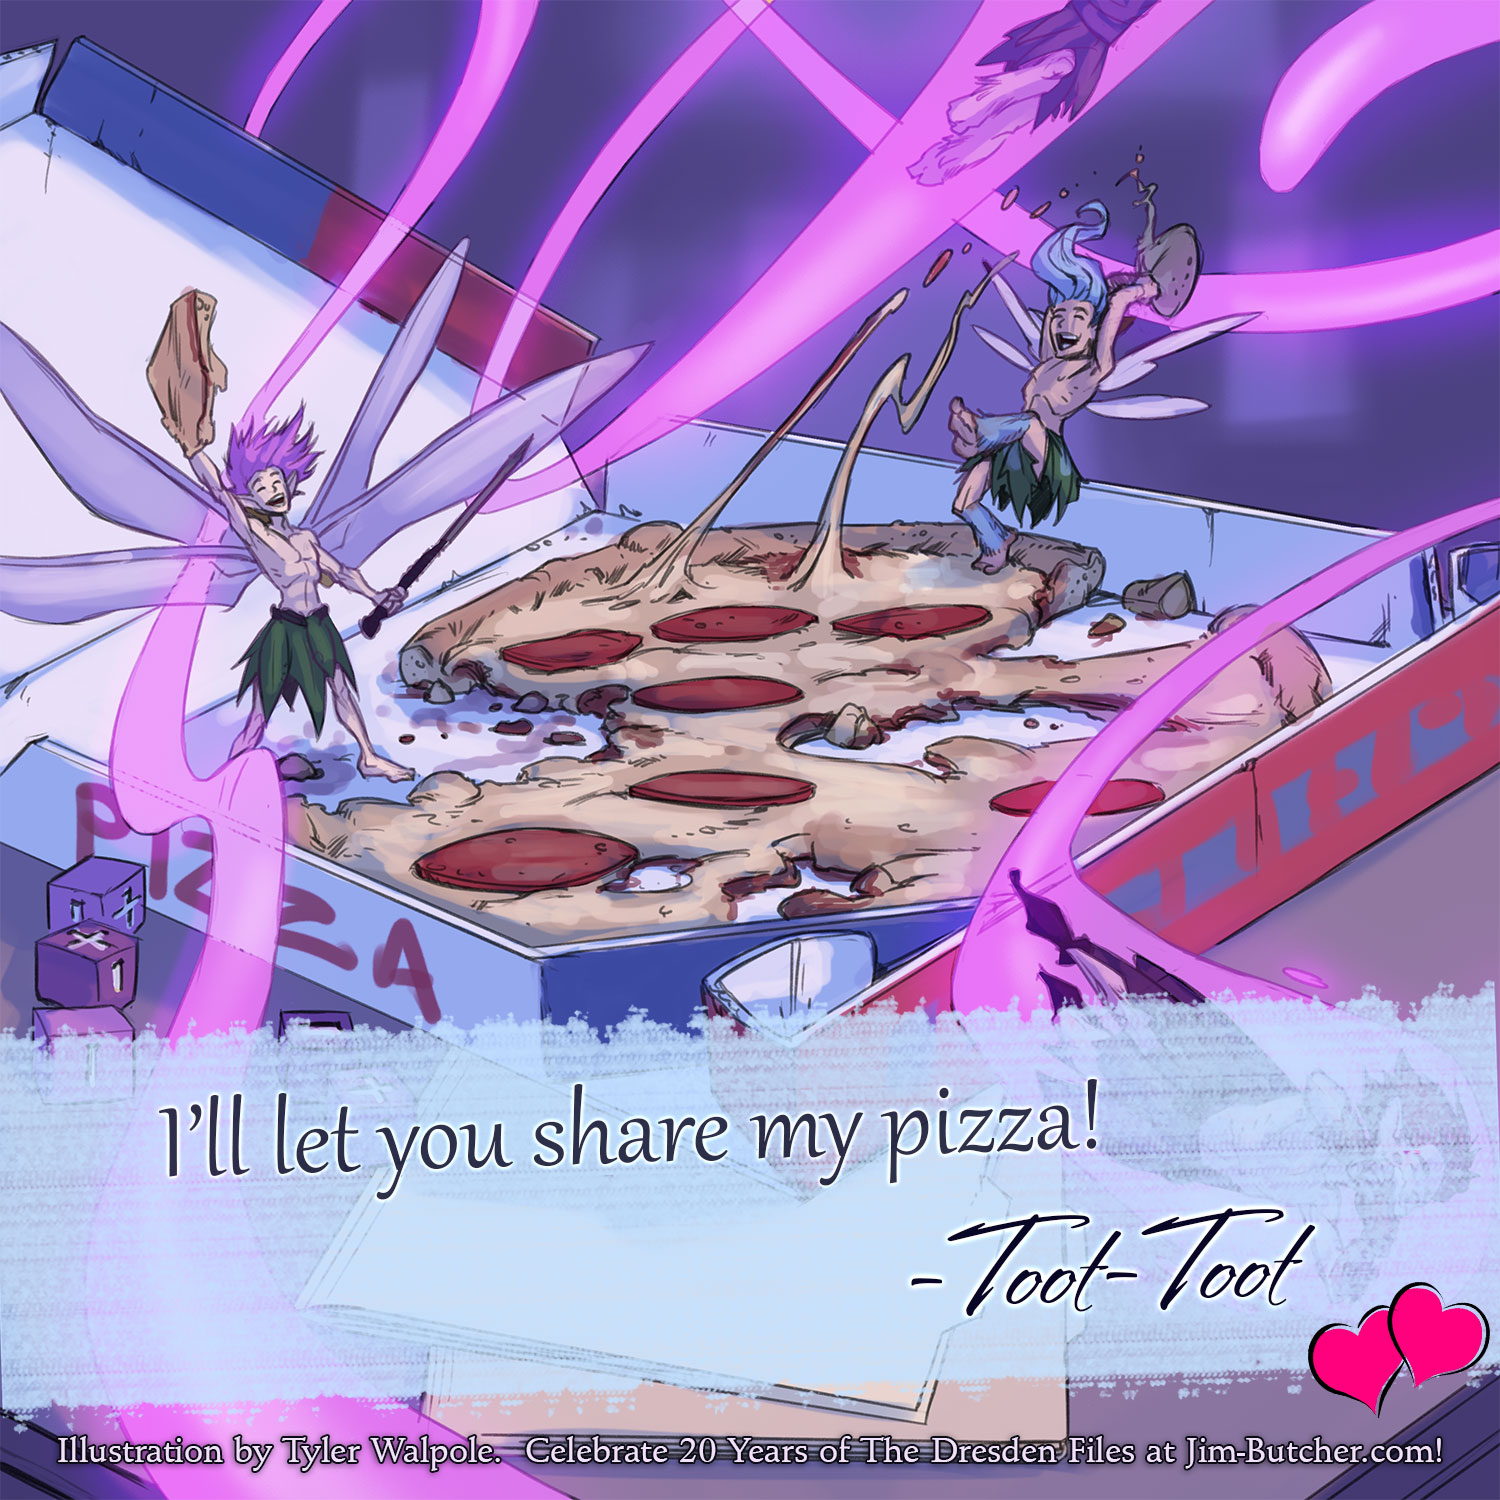 Toot-Toot: I'll let you share my pizza!